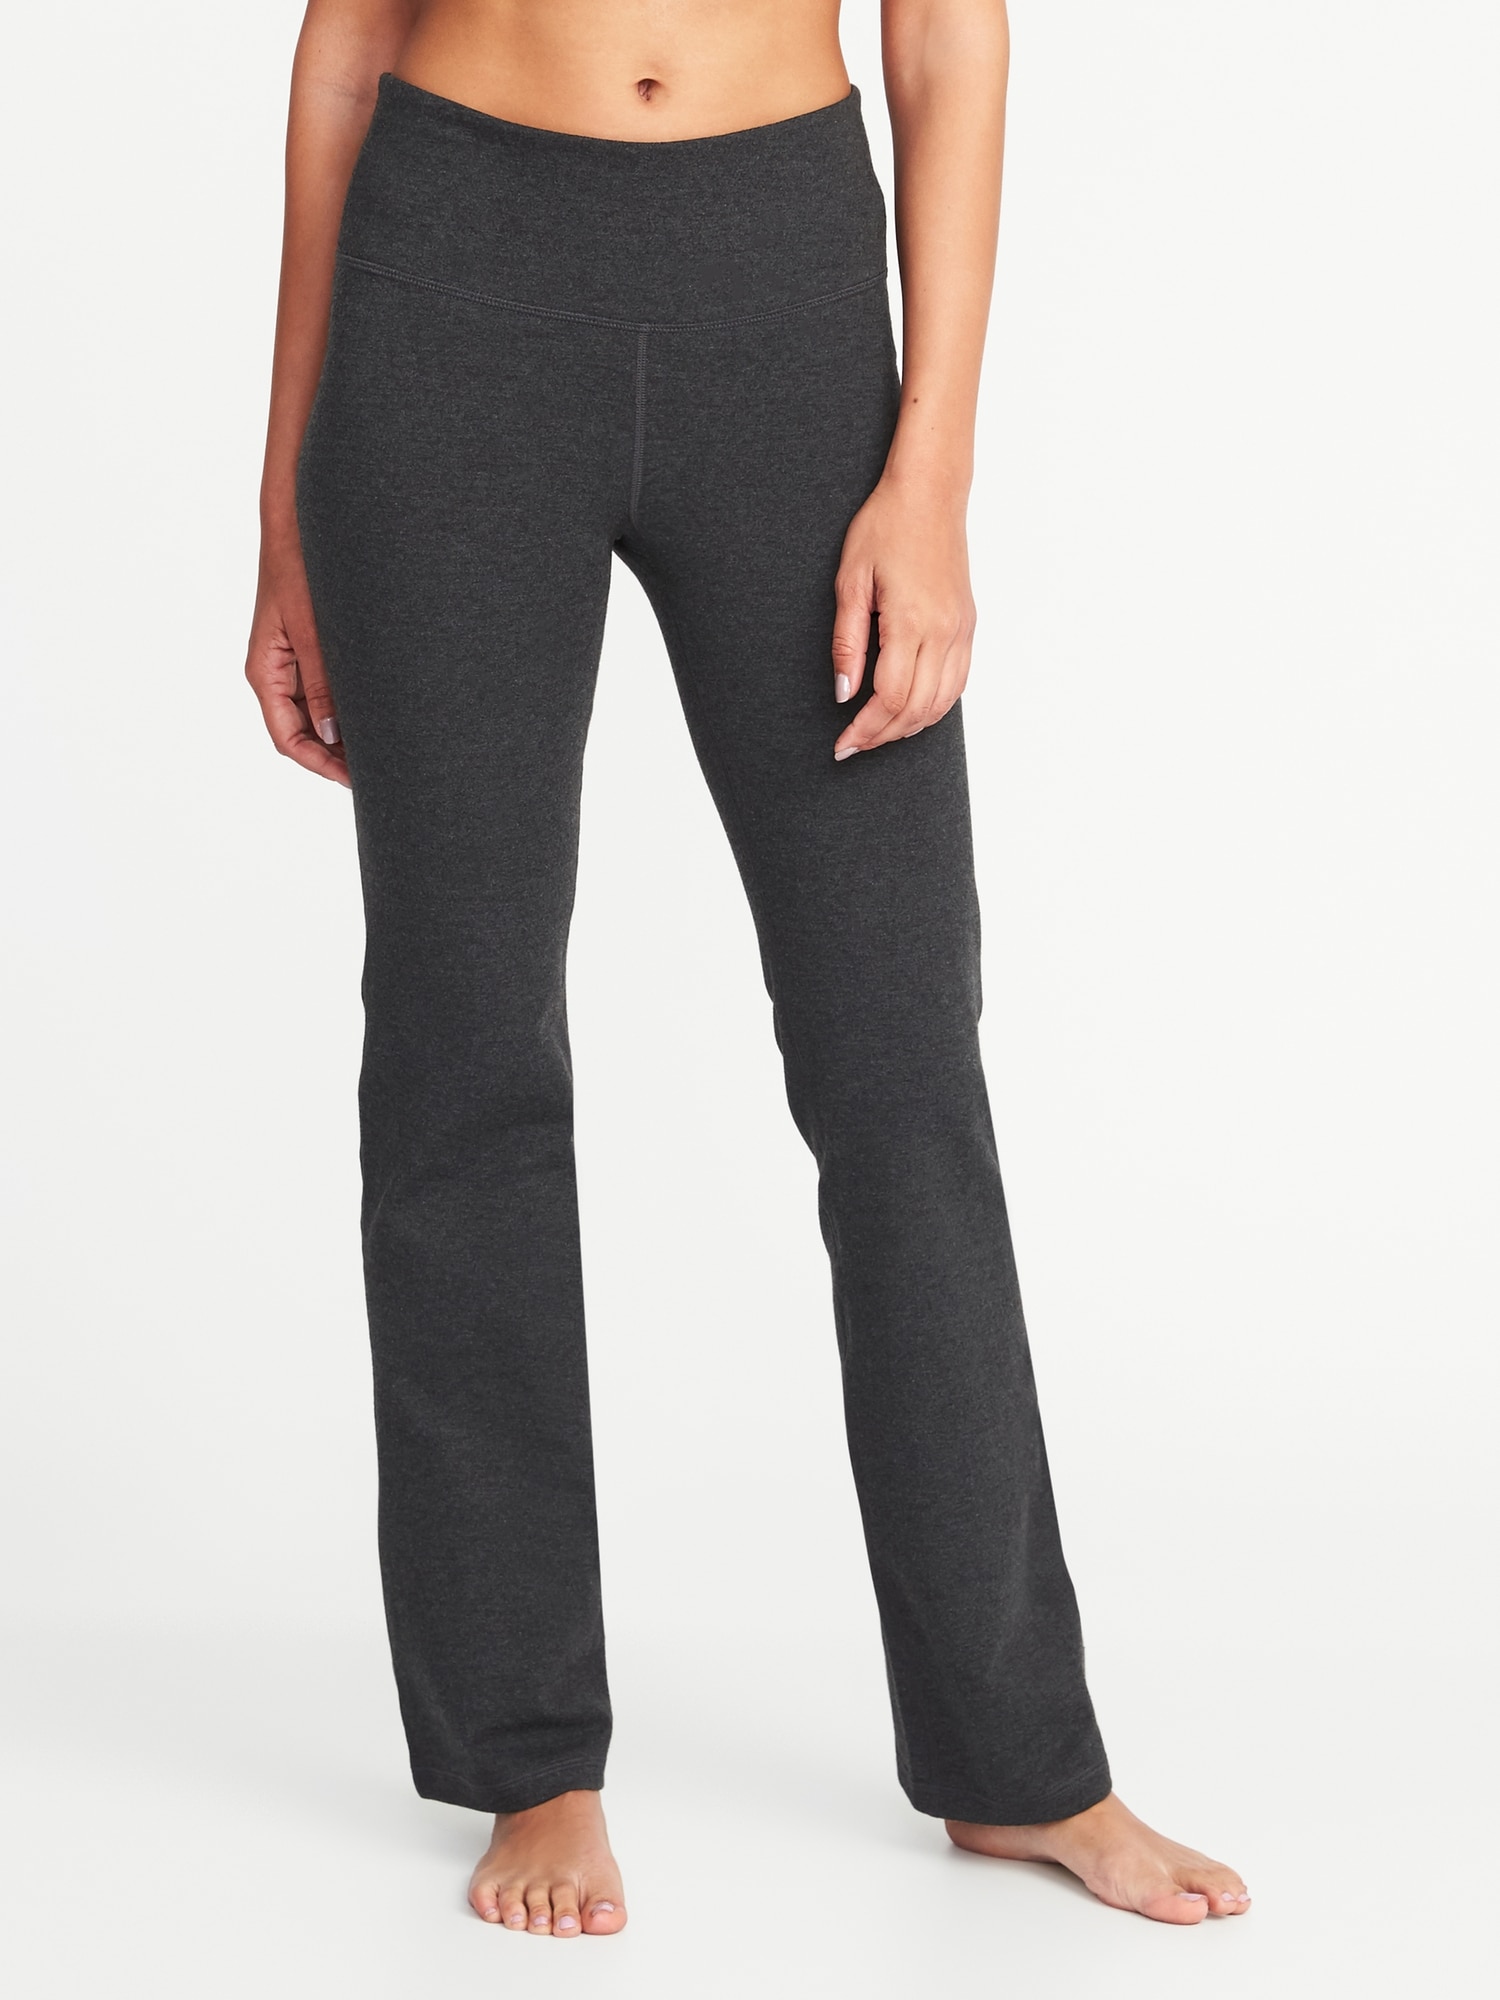 13 Pairs of Cozy Winter Pants from Amazon, Old Navy, Lululemon, and More